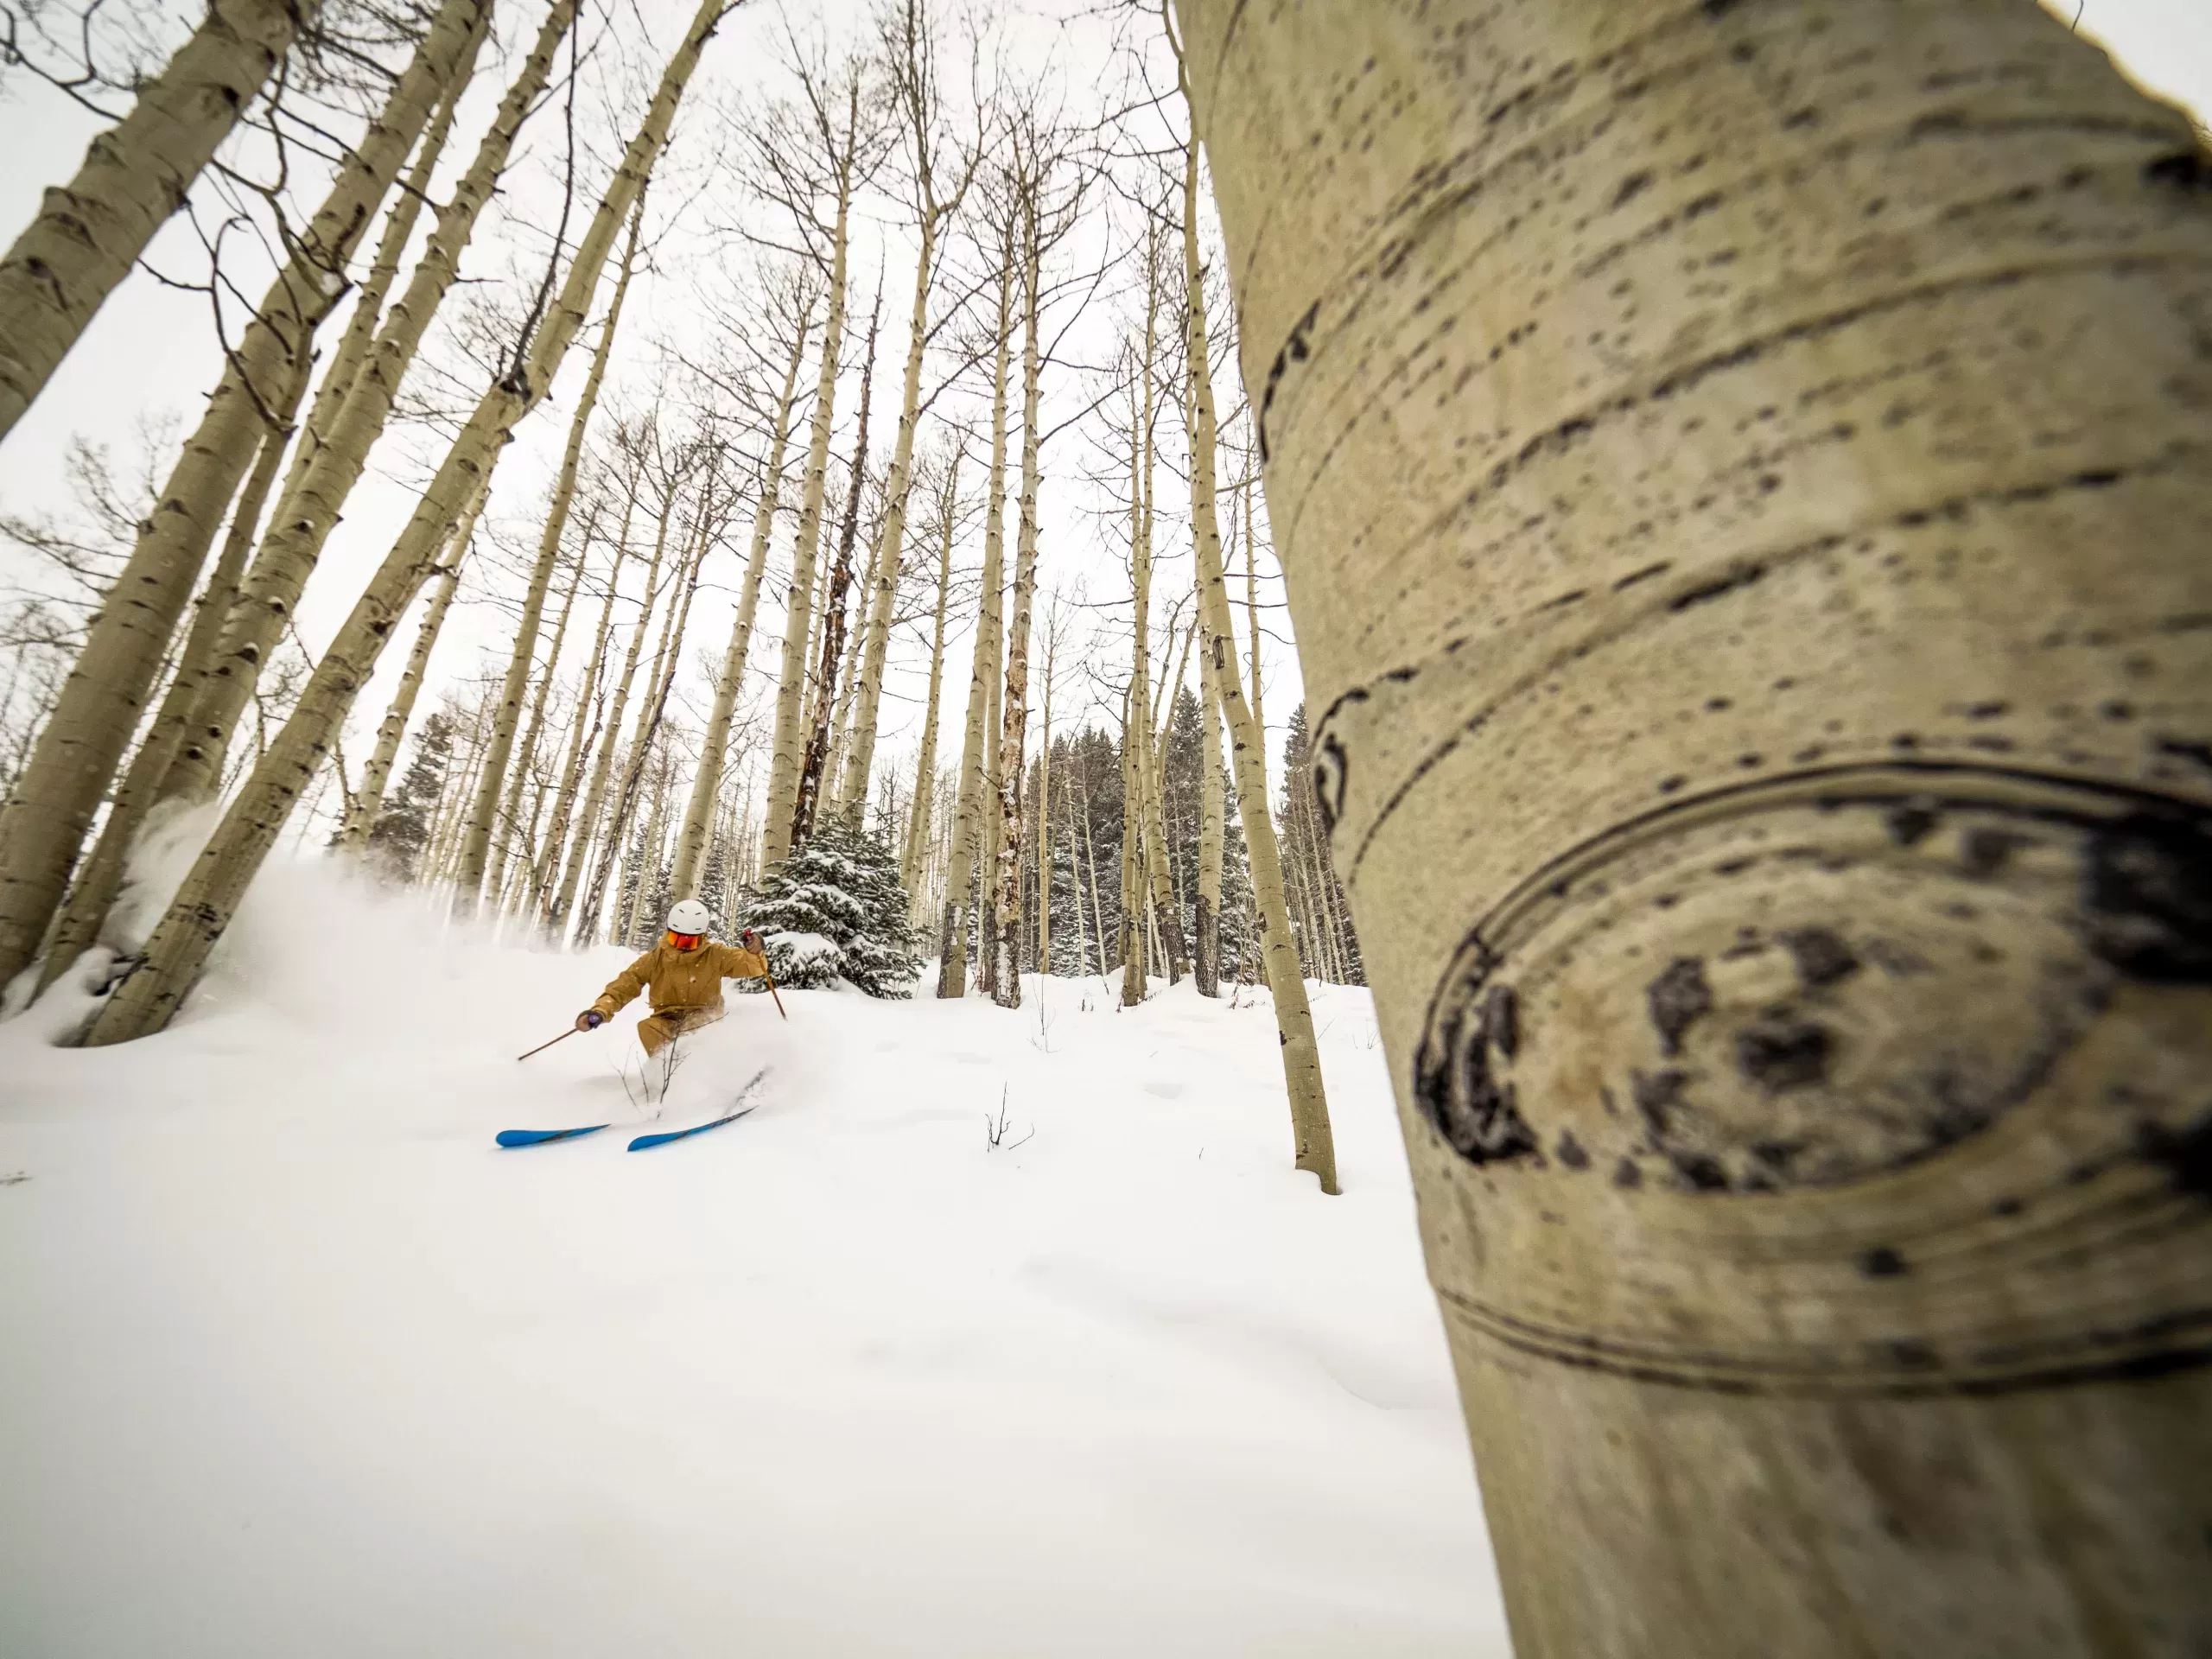 Skiing in aspen trees at Crested Butte